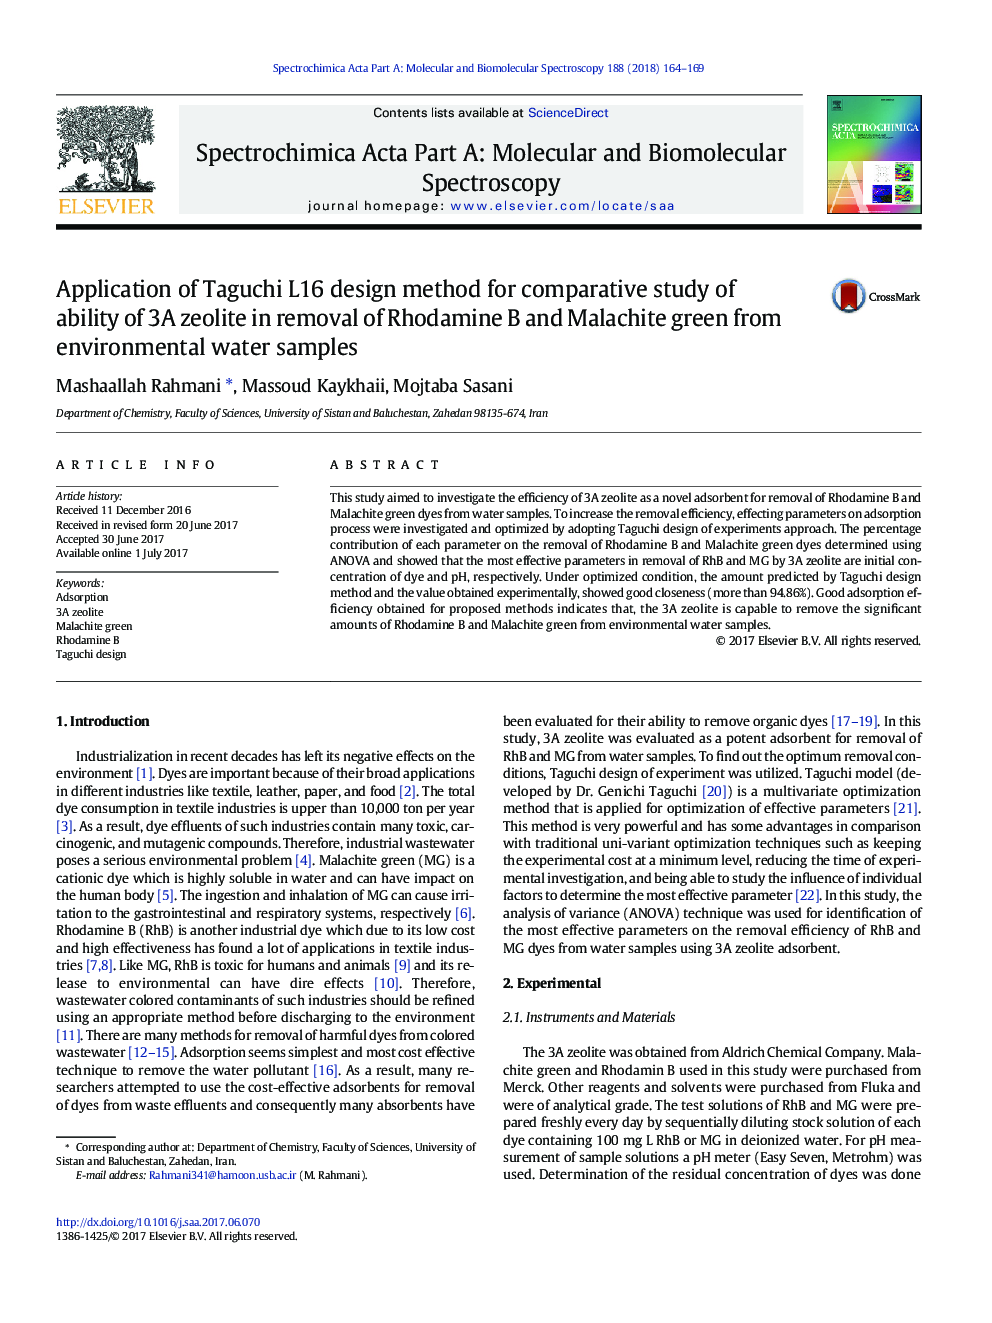 Application of Taguchi L16 design method for comparative study of ability of 3A zeolite in removal of Rhodamine B and Malachite green from environmental water samples